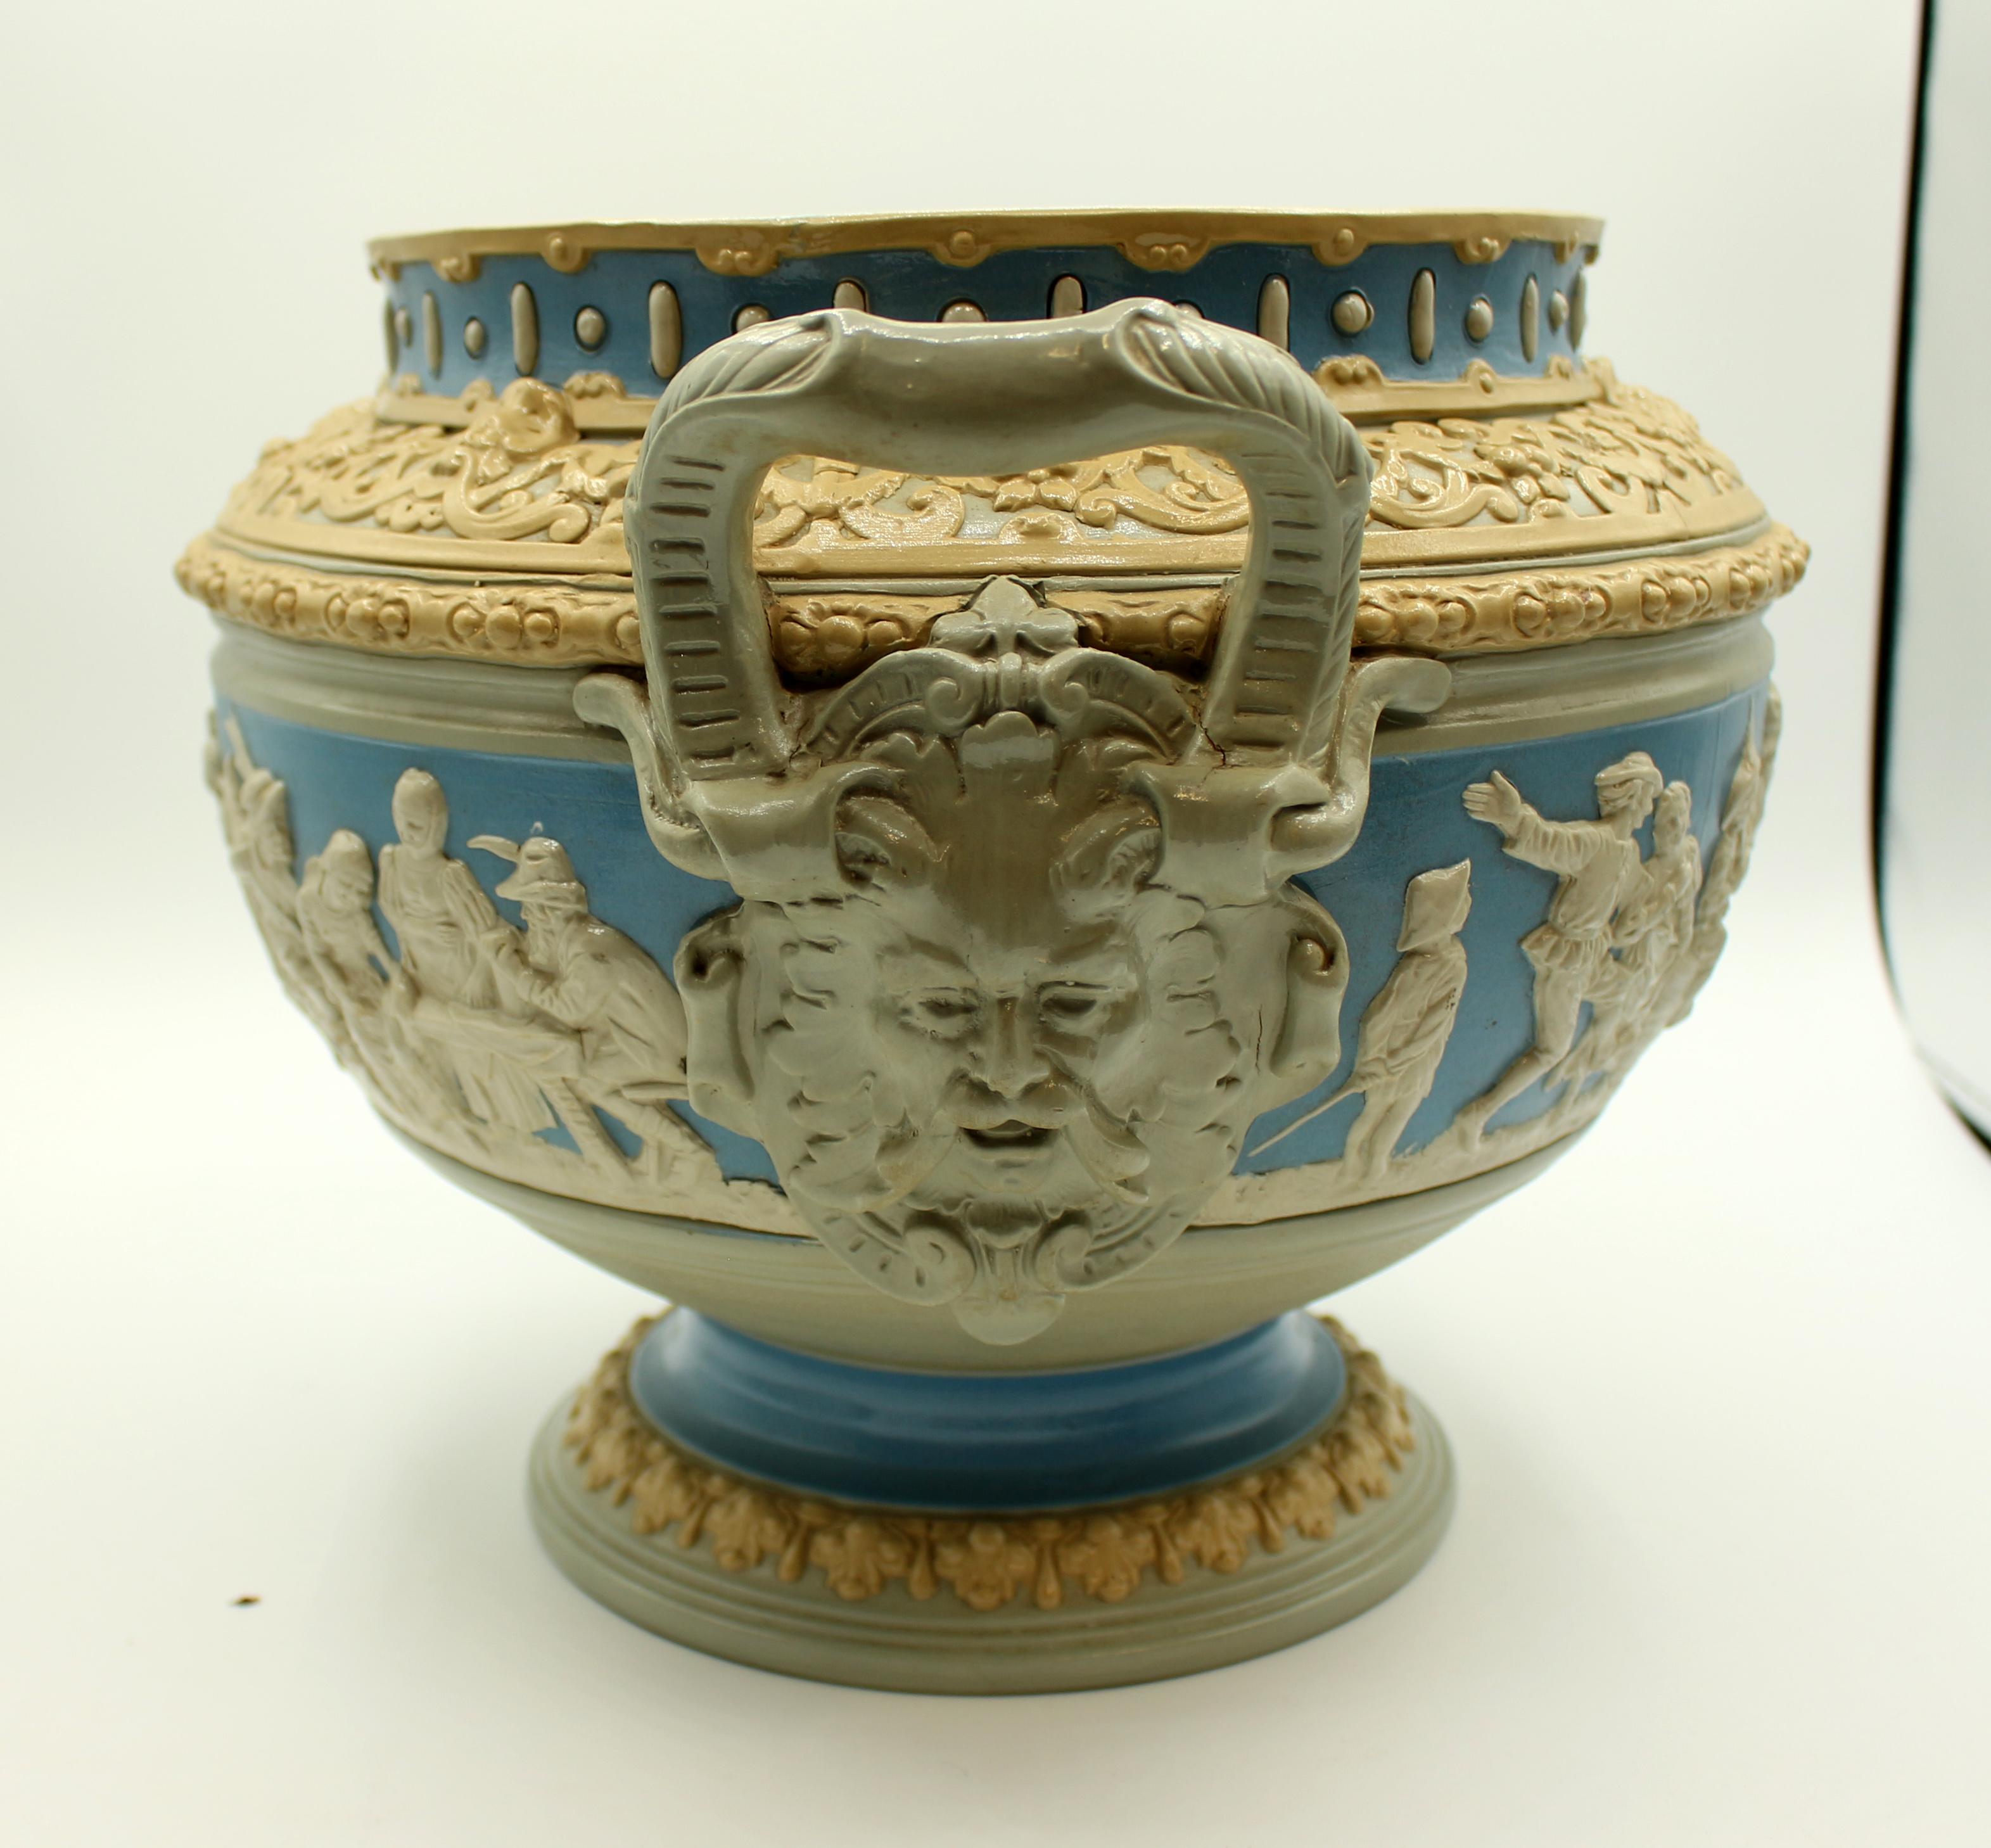 Early 20th century Mettlach stoneware punch bowl with undertray & cover. German works, #2087 with full US & German patent marks. Renaissance Revival style with German towns of note for drinking and old German phrases on stand playing on drinking